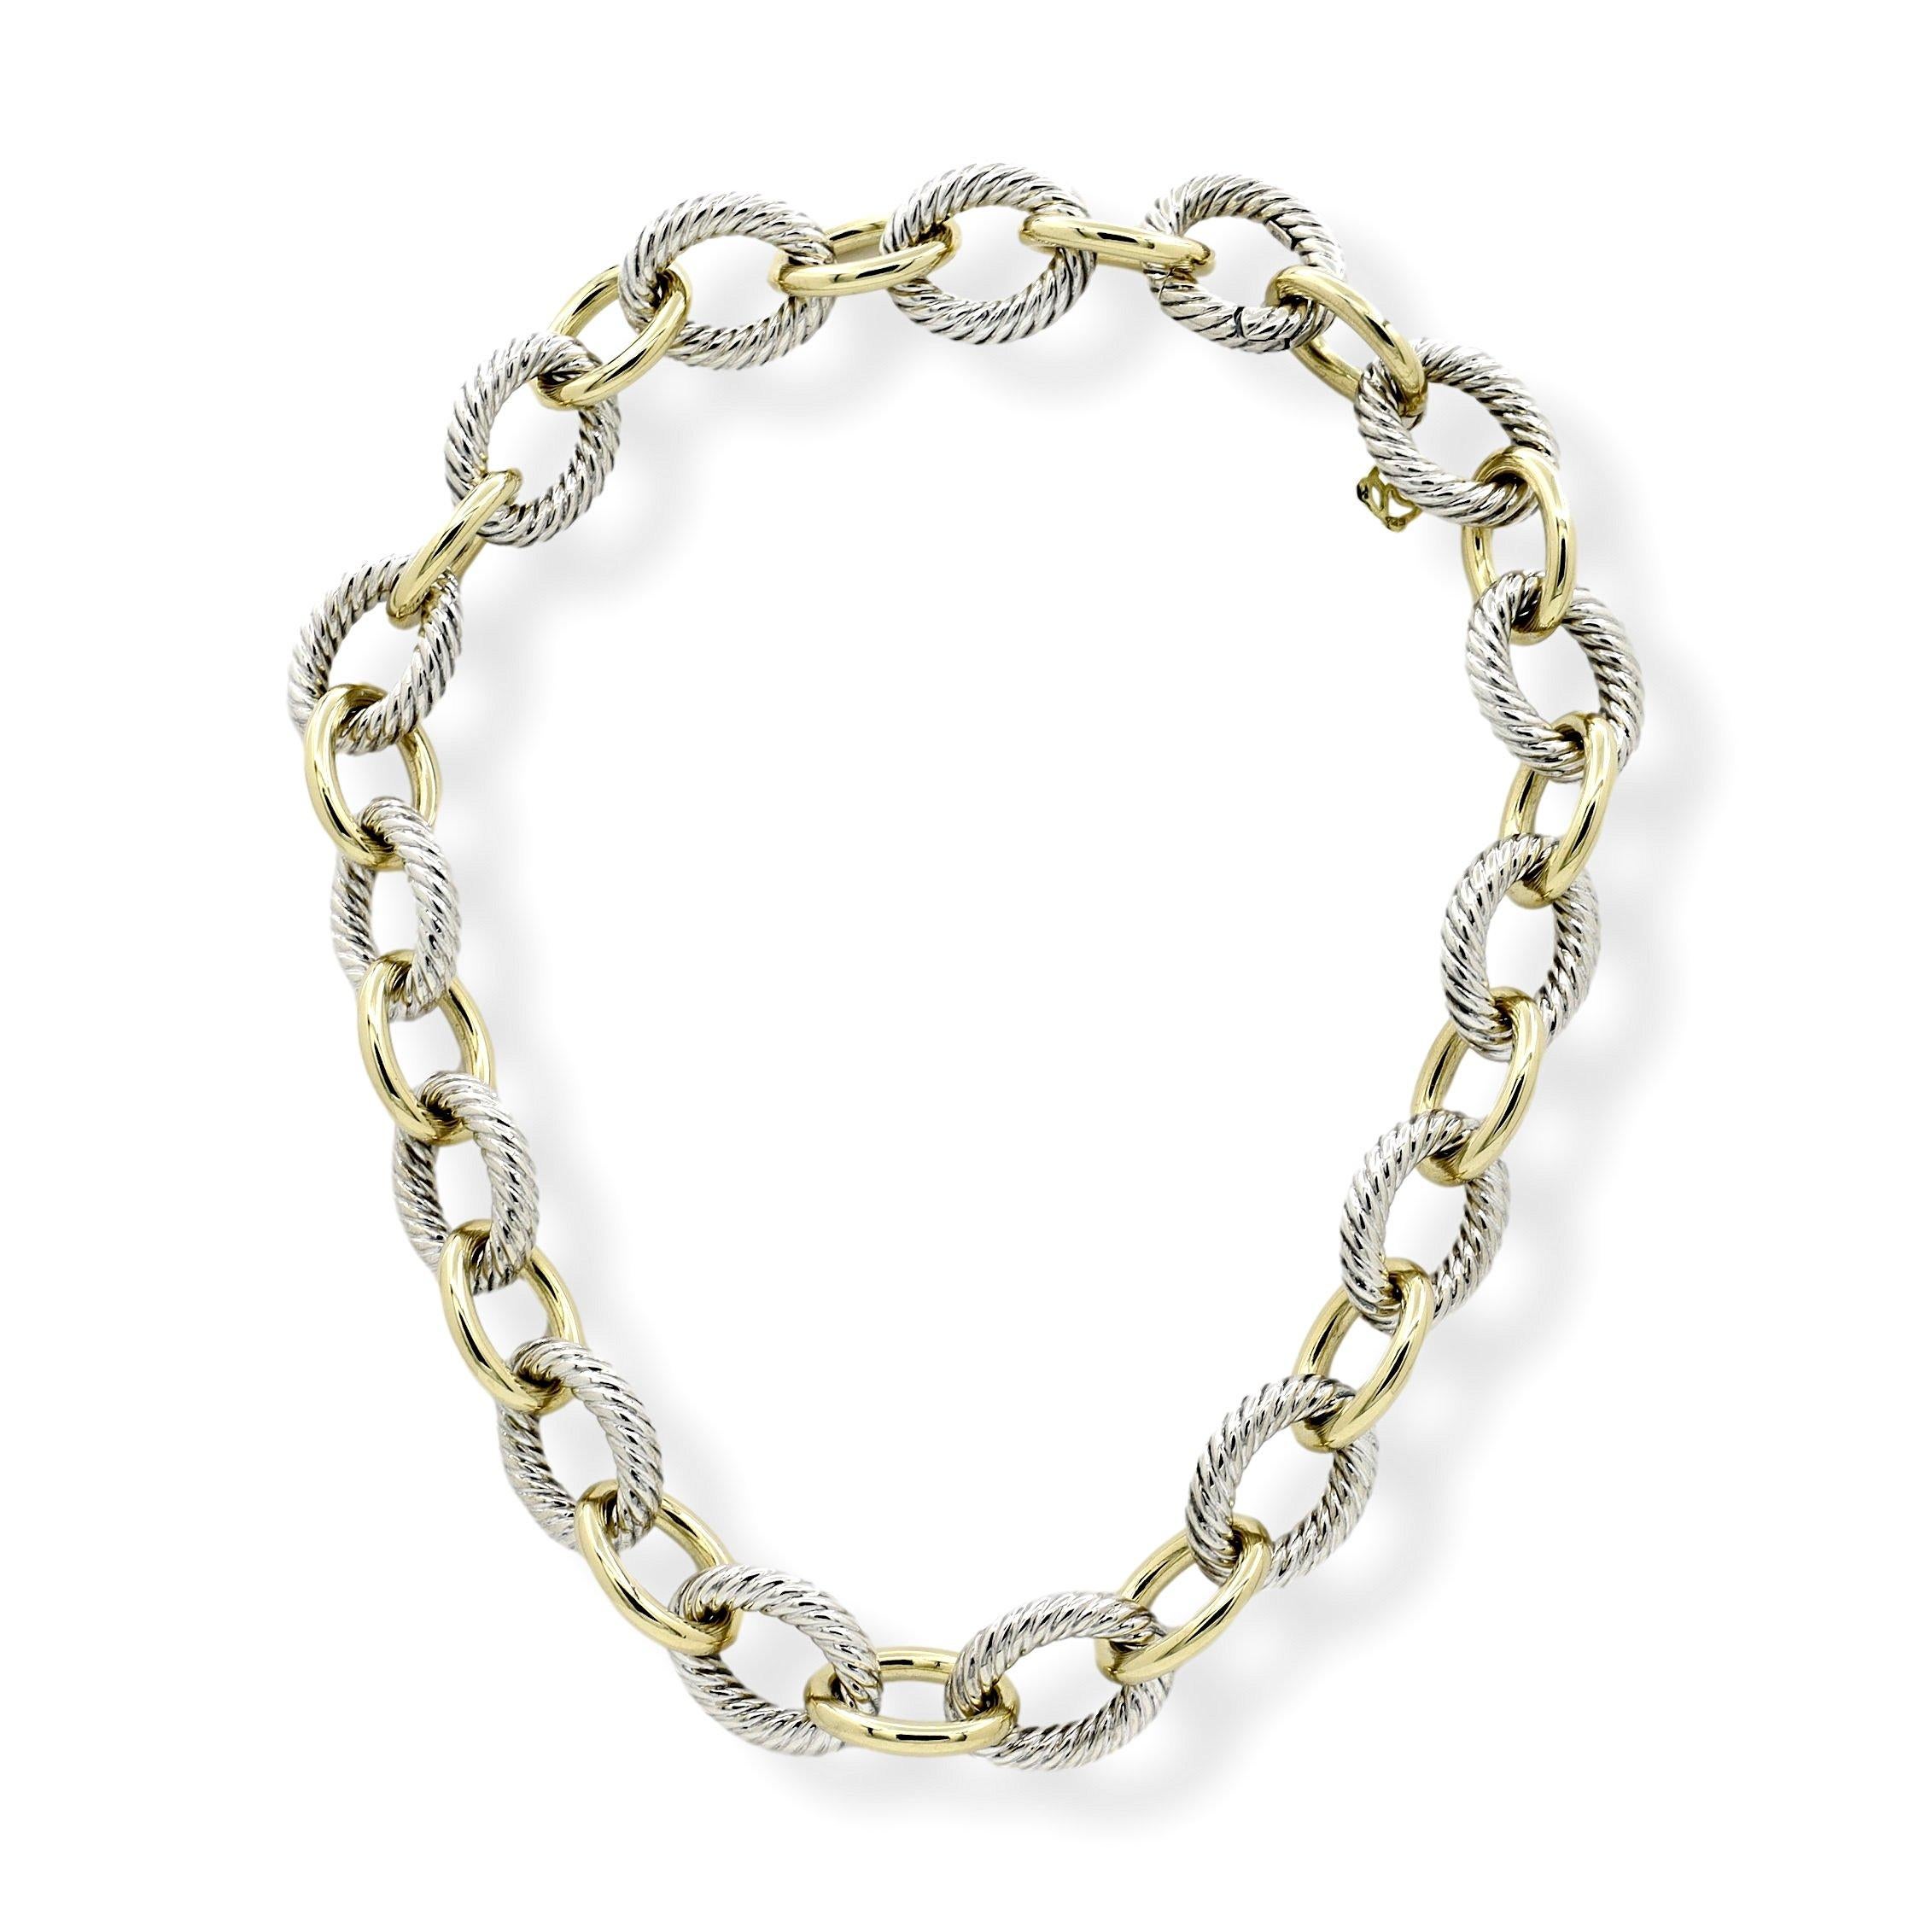 David Yurman necklace from the chain link collection with large interlocking oval links finely crafted in 18 karat yellow gold and sterling silver. Gold links have a smooth finish and silver links carry the iconic twisted cable finish measuring